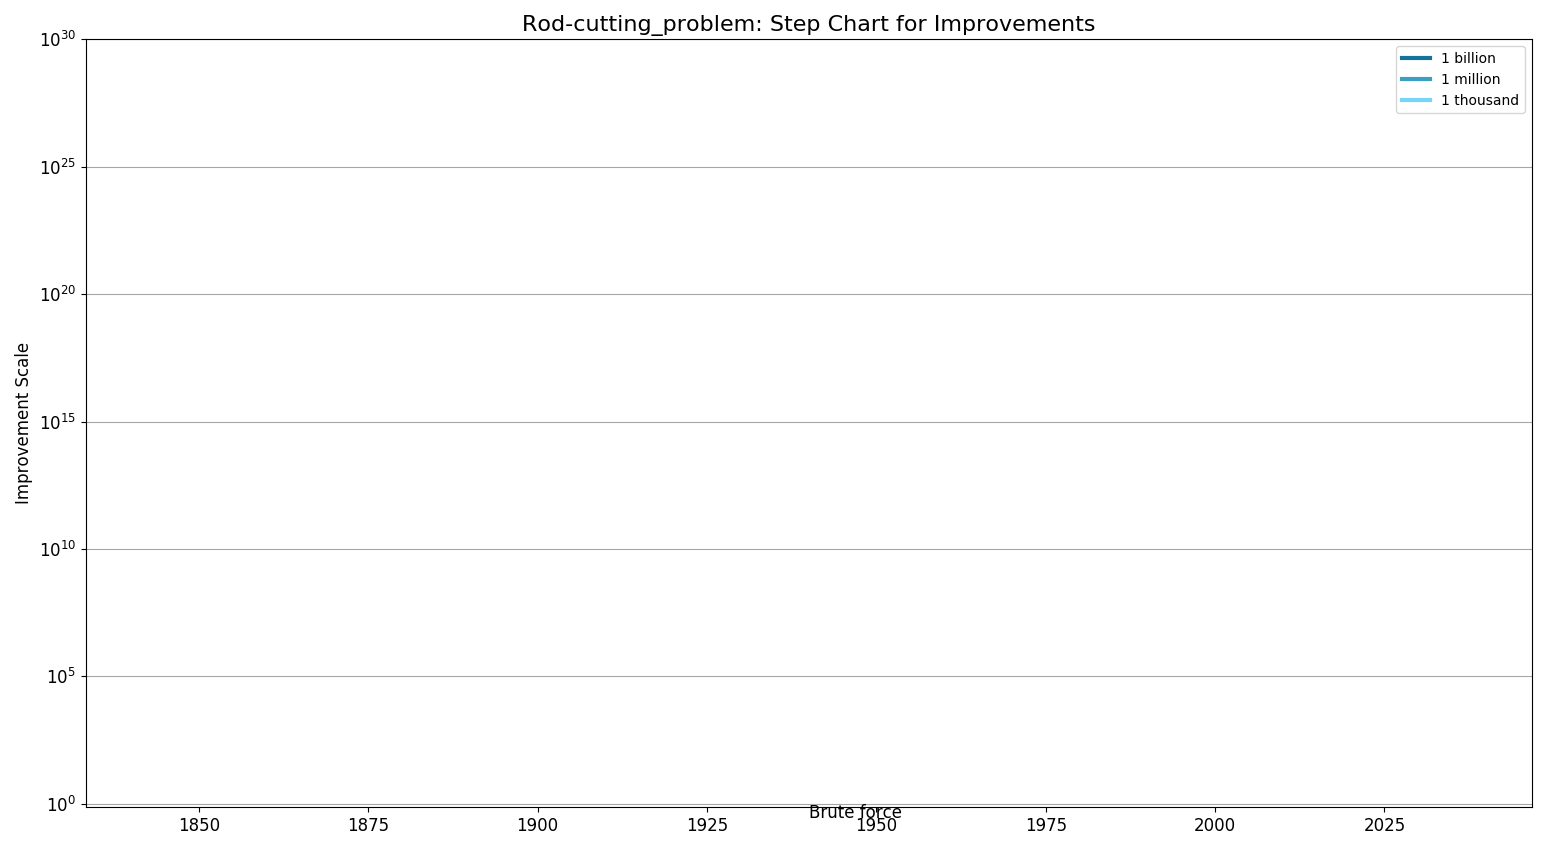 File:Rod-cutting problemStepChart.png